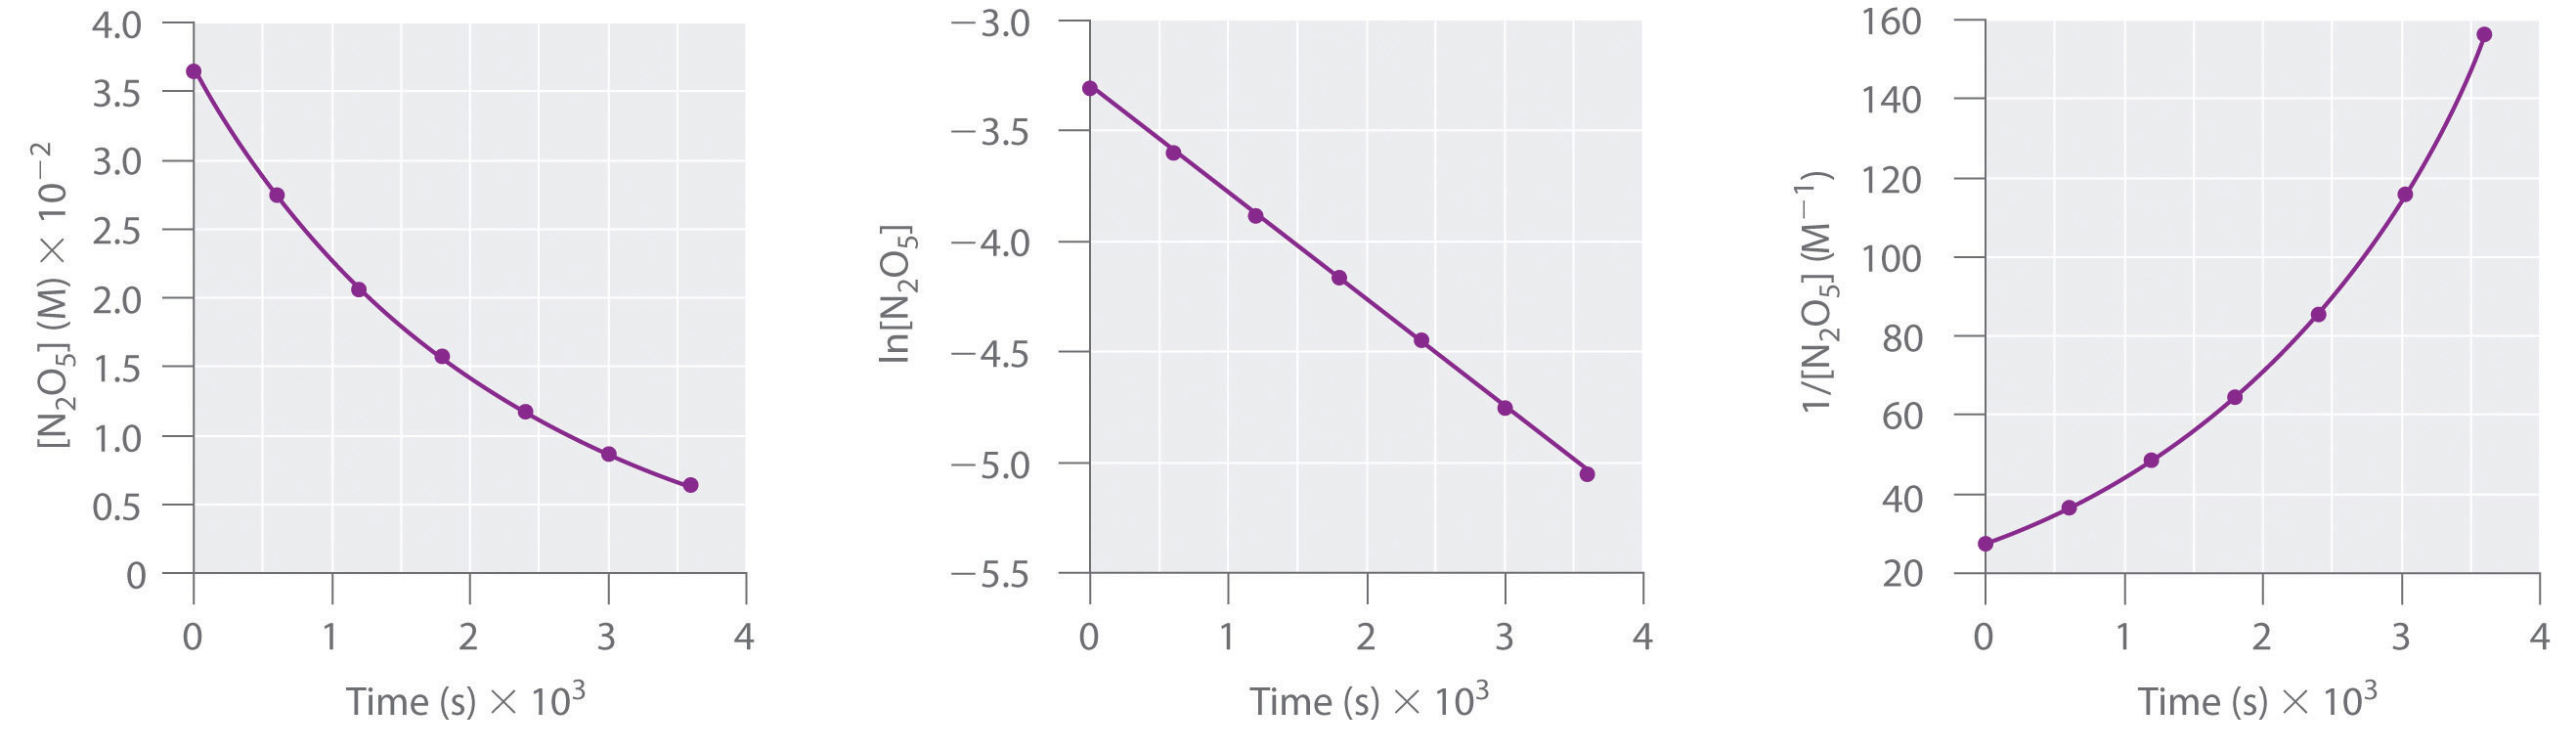 determining sample size for time series